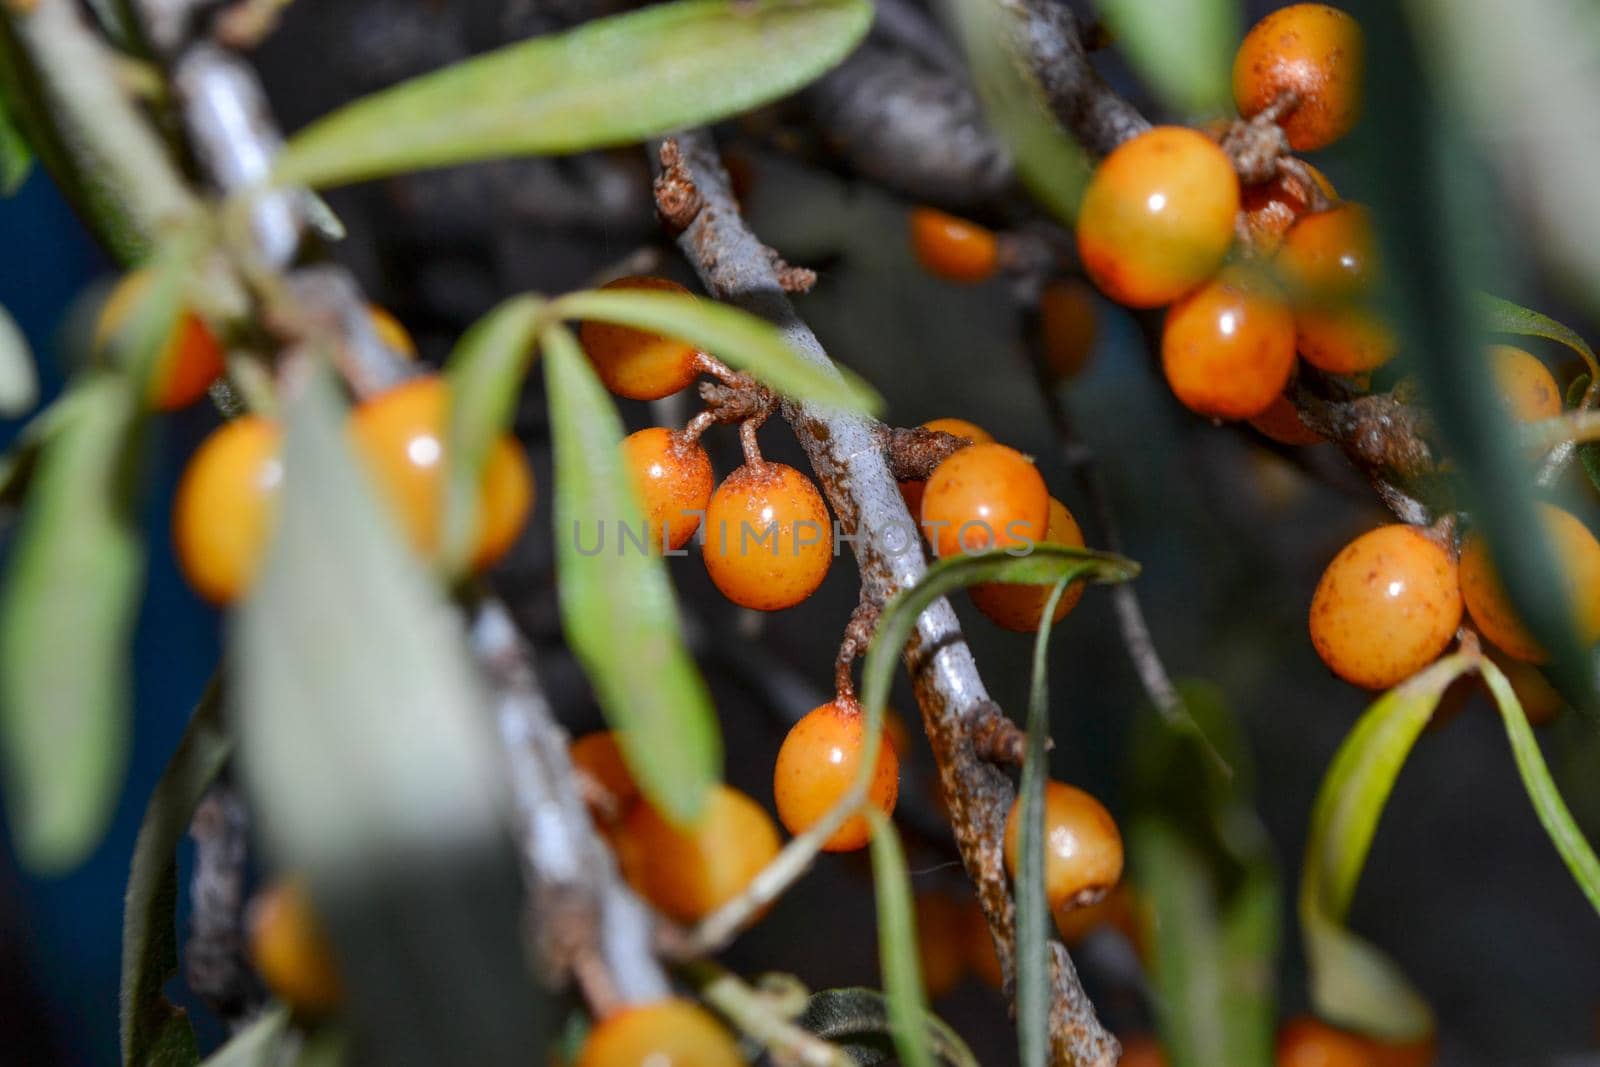 Green branch with bright ripe orange sea buckthorn berries gently swaying in wind. Sea Buckthorn berries on a branch with torns - Shallow depth of field. High quality photo